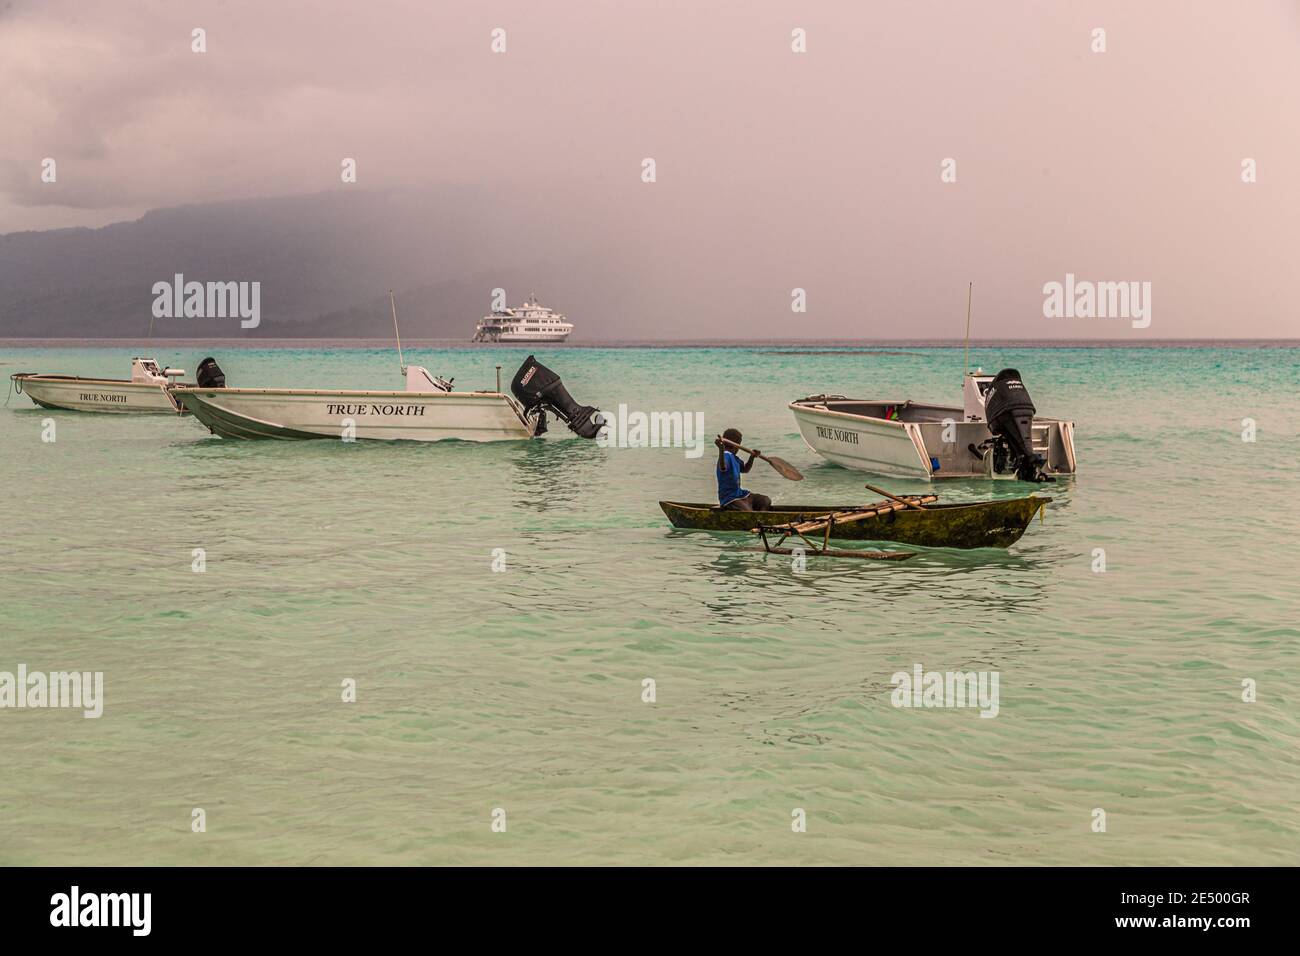 Young local surfs an outrigger canoe on Bougainville beach, Papua New Guinea Stock Photo